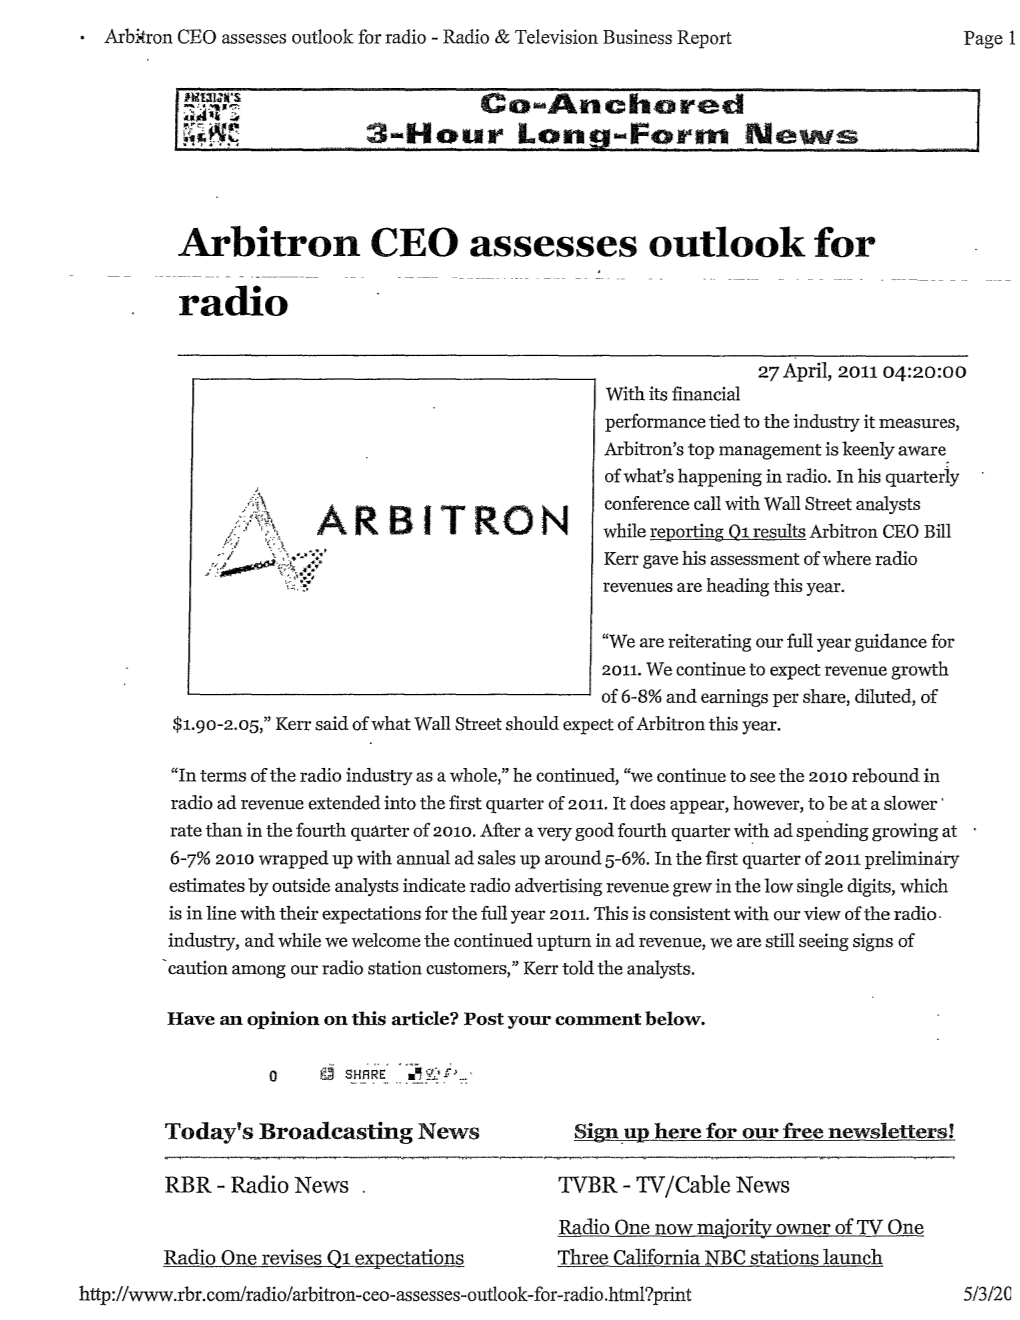 Arbitron CEO Assesses Outlook for Radio